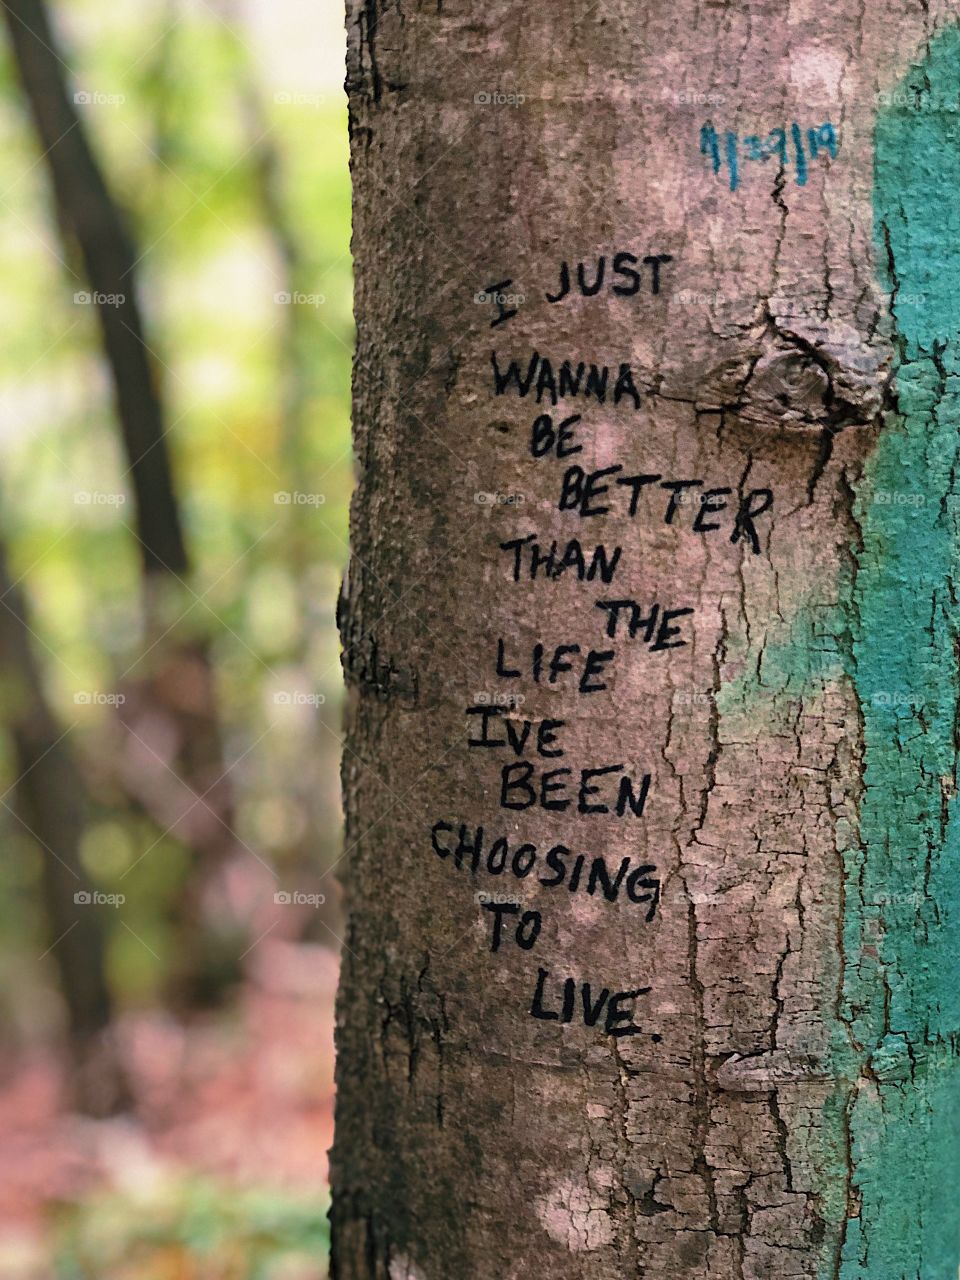 Messages In The Woods, Words On The Trees, The Forest Has Messages, Cold Springs Harbor Park, Graffiti In The Woods, Writing On The Bark, Vandalizing The Trees, Art In The Woods 